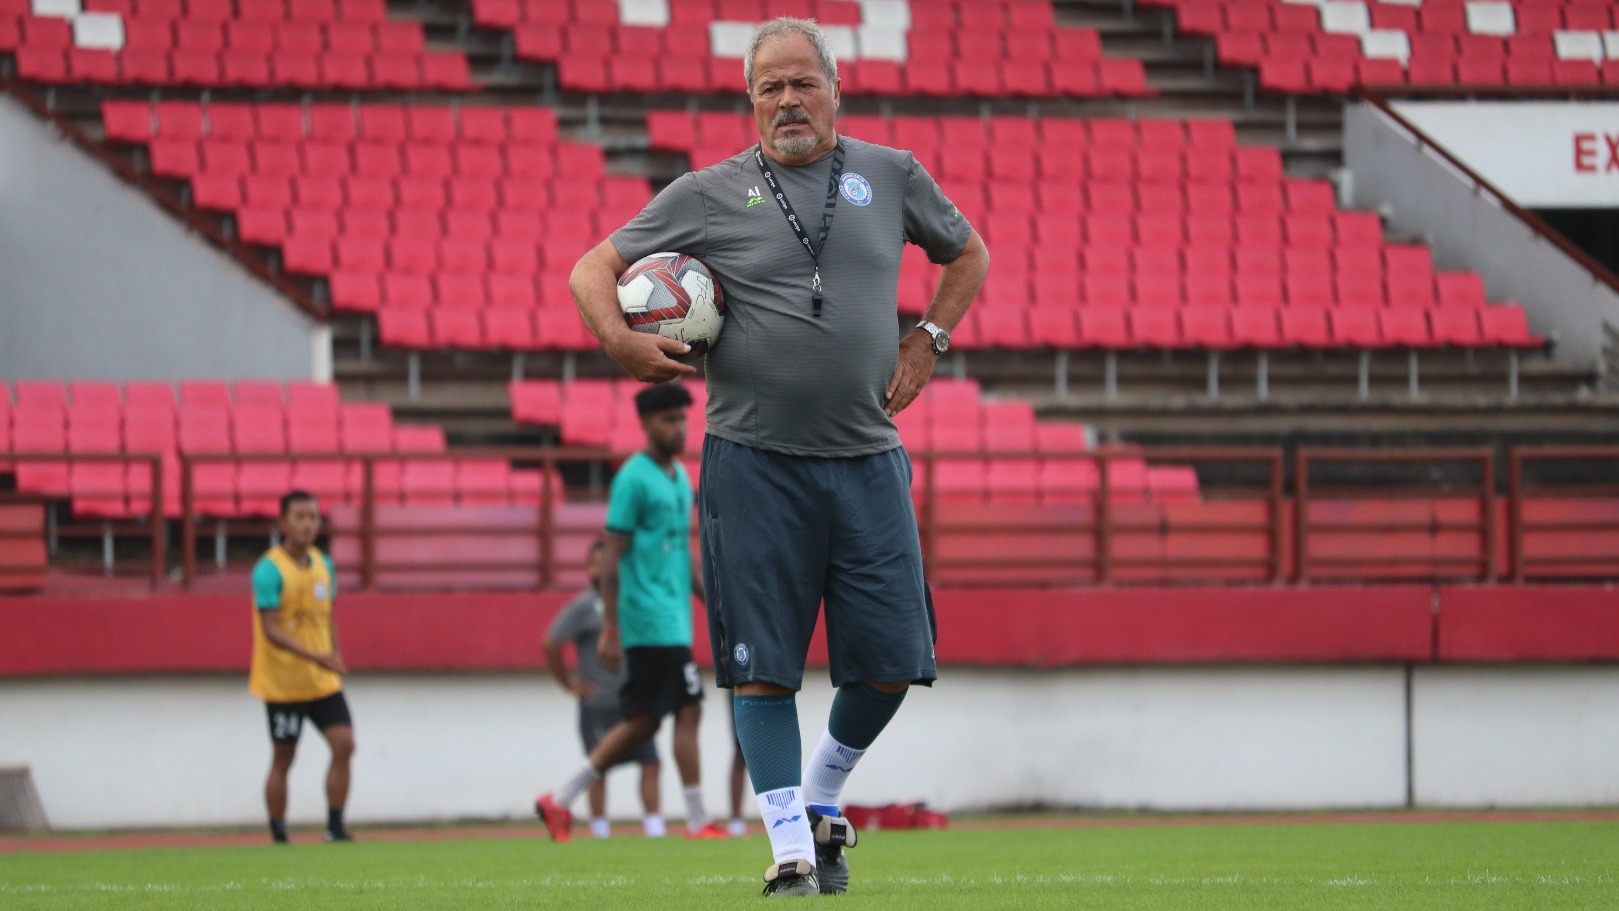 ISL 2019-20 | Jamshedpur could have had a penalty but referee missed it, laments Antonio Iriondo